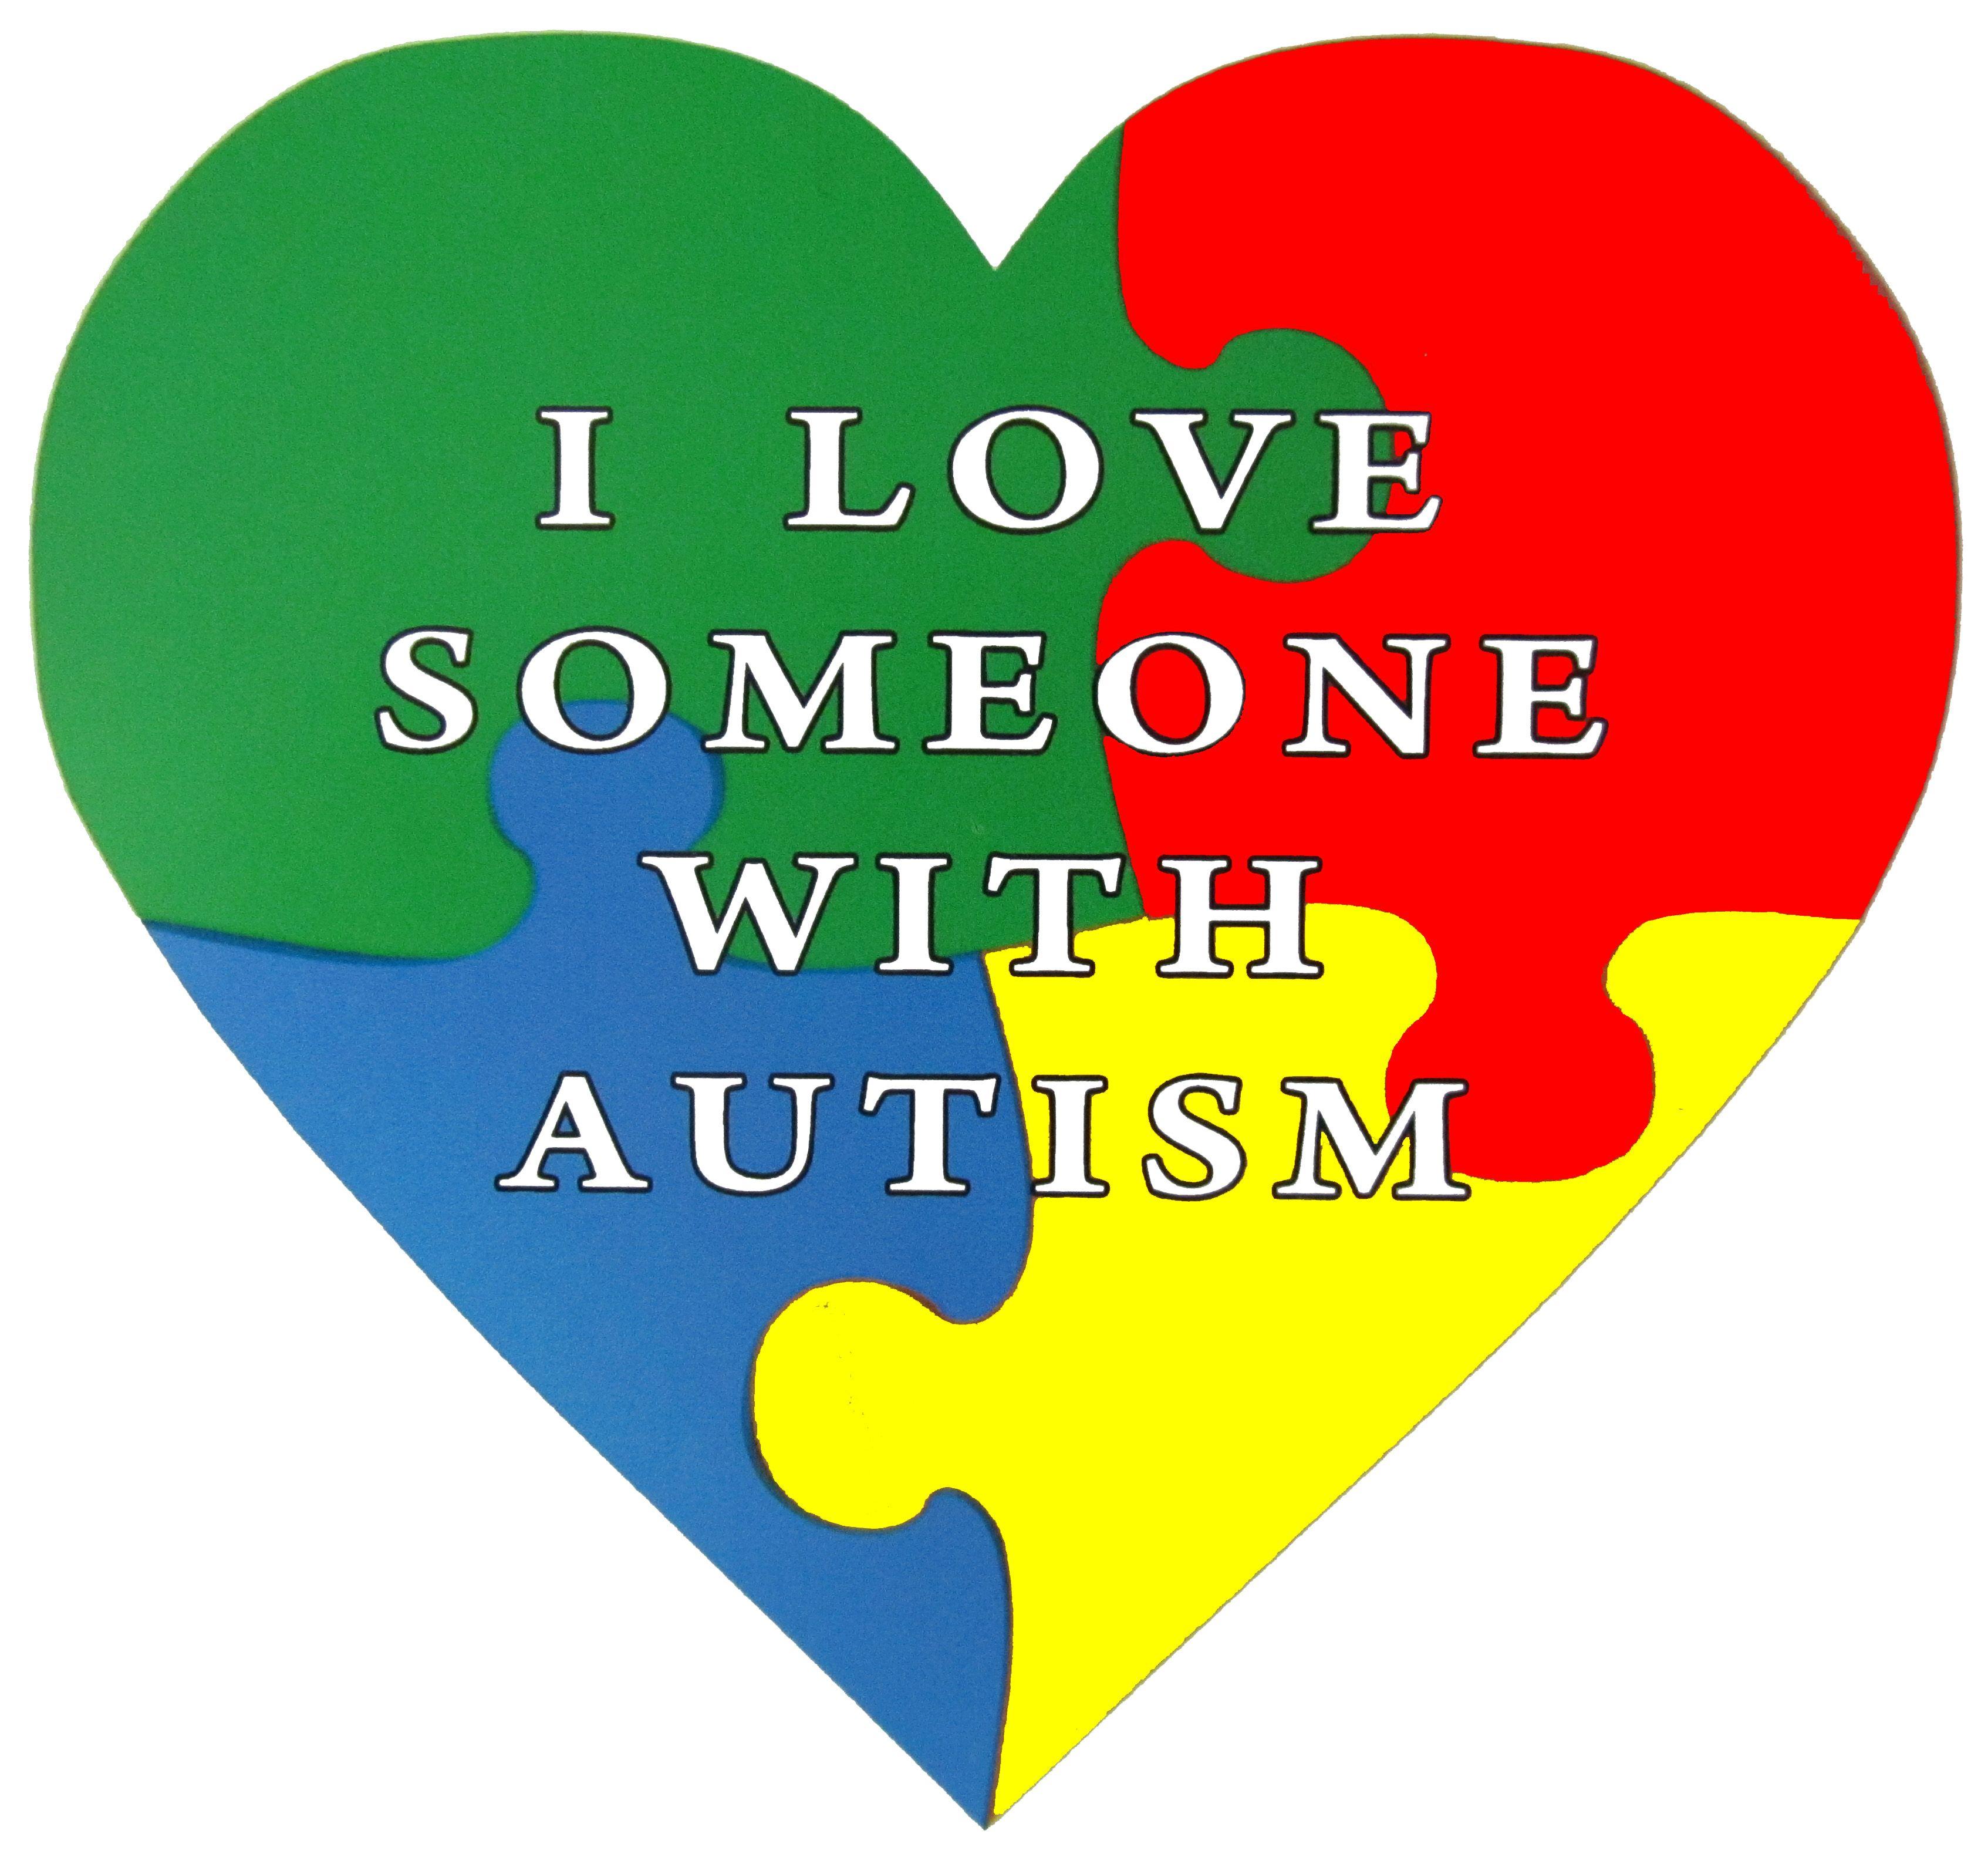 Write a 300 word piece on supporting children with autism. Autism